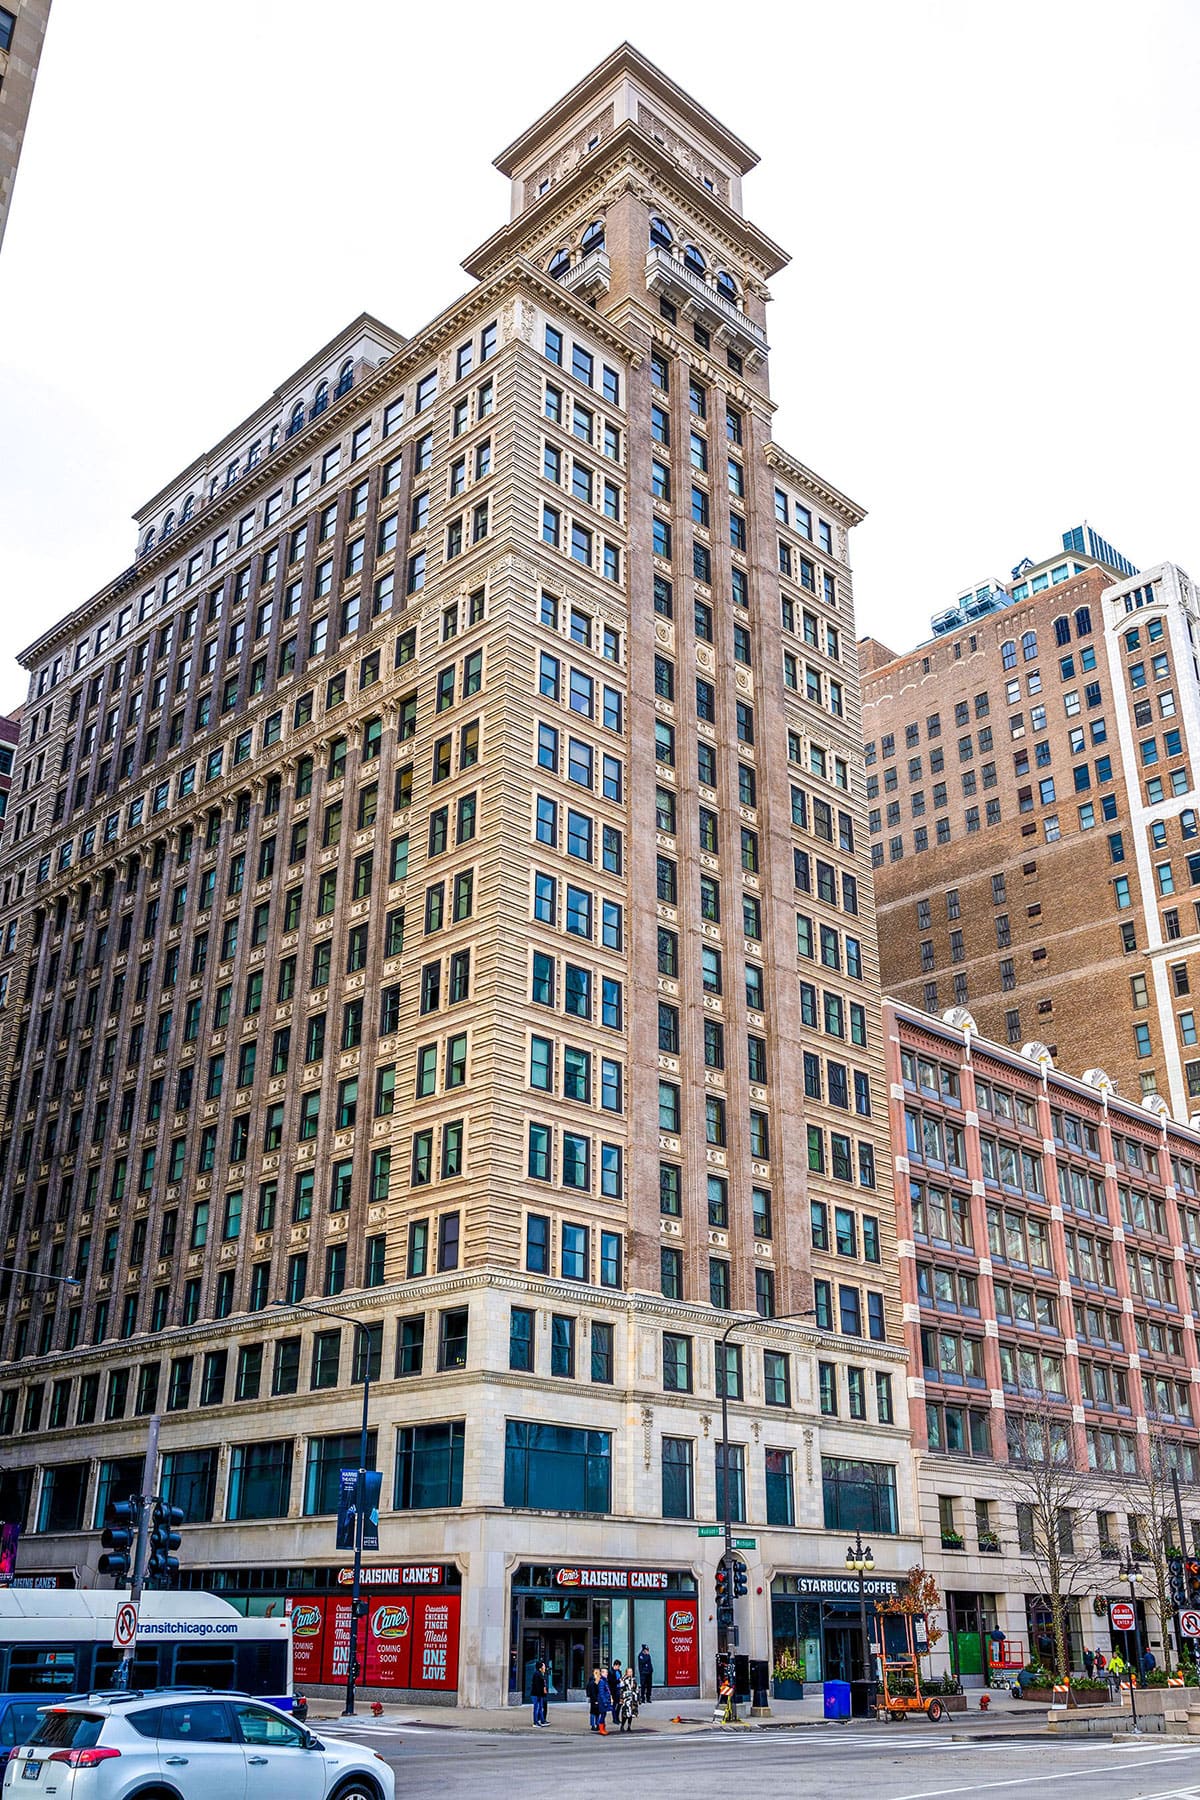 Current day photo of the Montgomery Ward Tower Building on Michigan Avenue